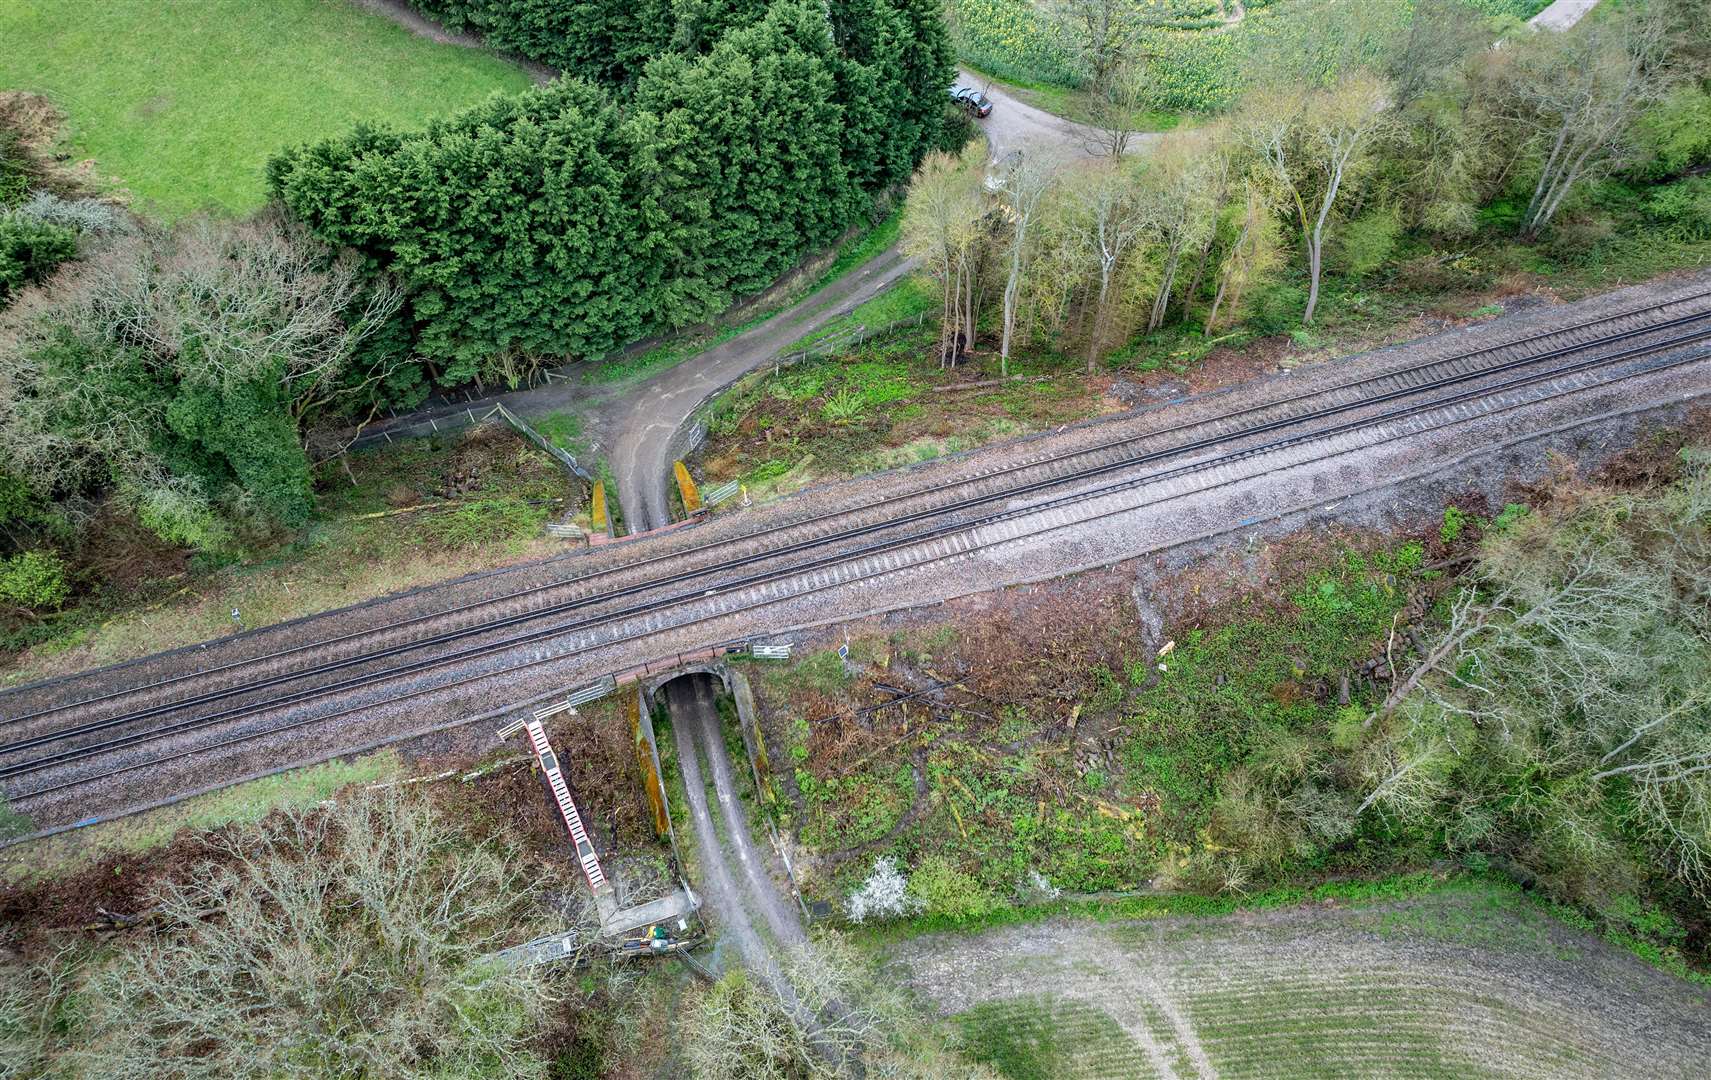 A senior railway engineer has warned the ground is still moving where the landslide happened